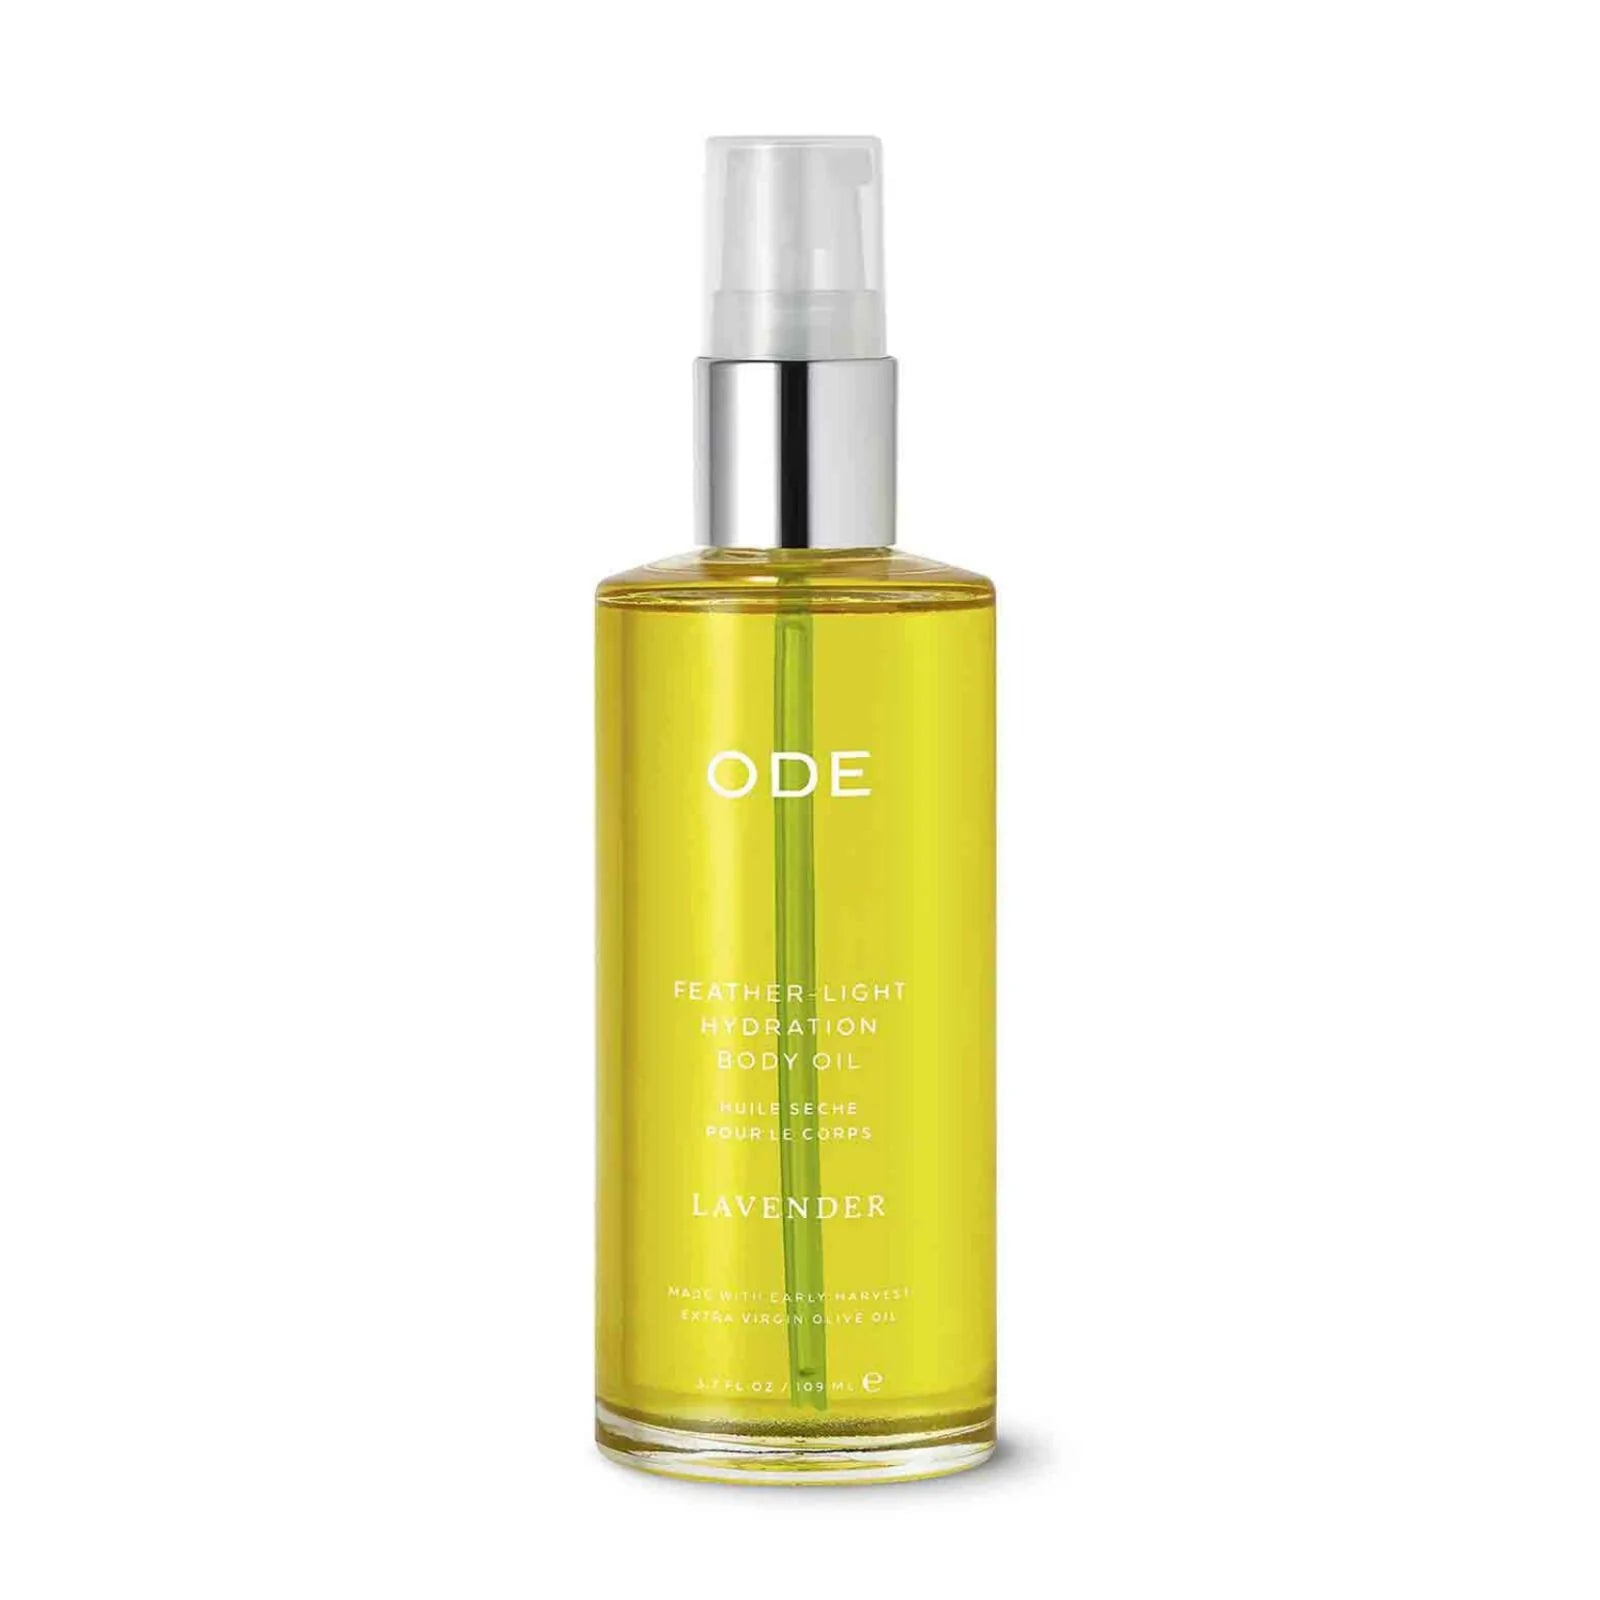 Feather-Light Hydration Body Oil Georgetown Olive Oil Co.